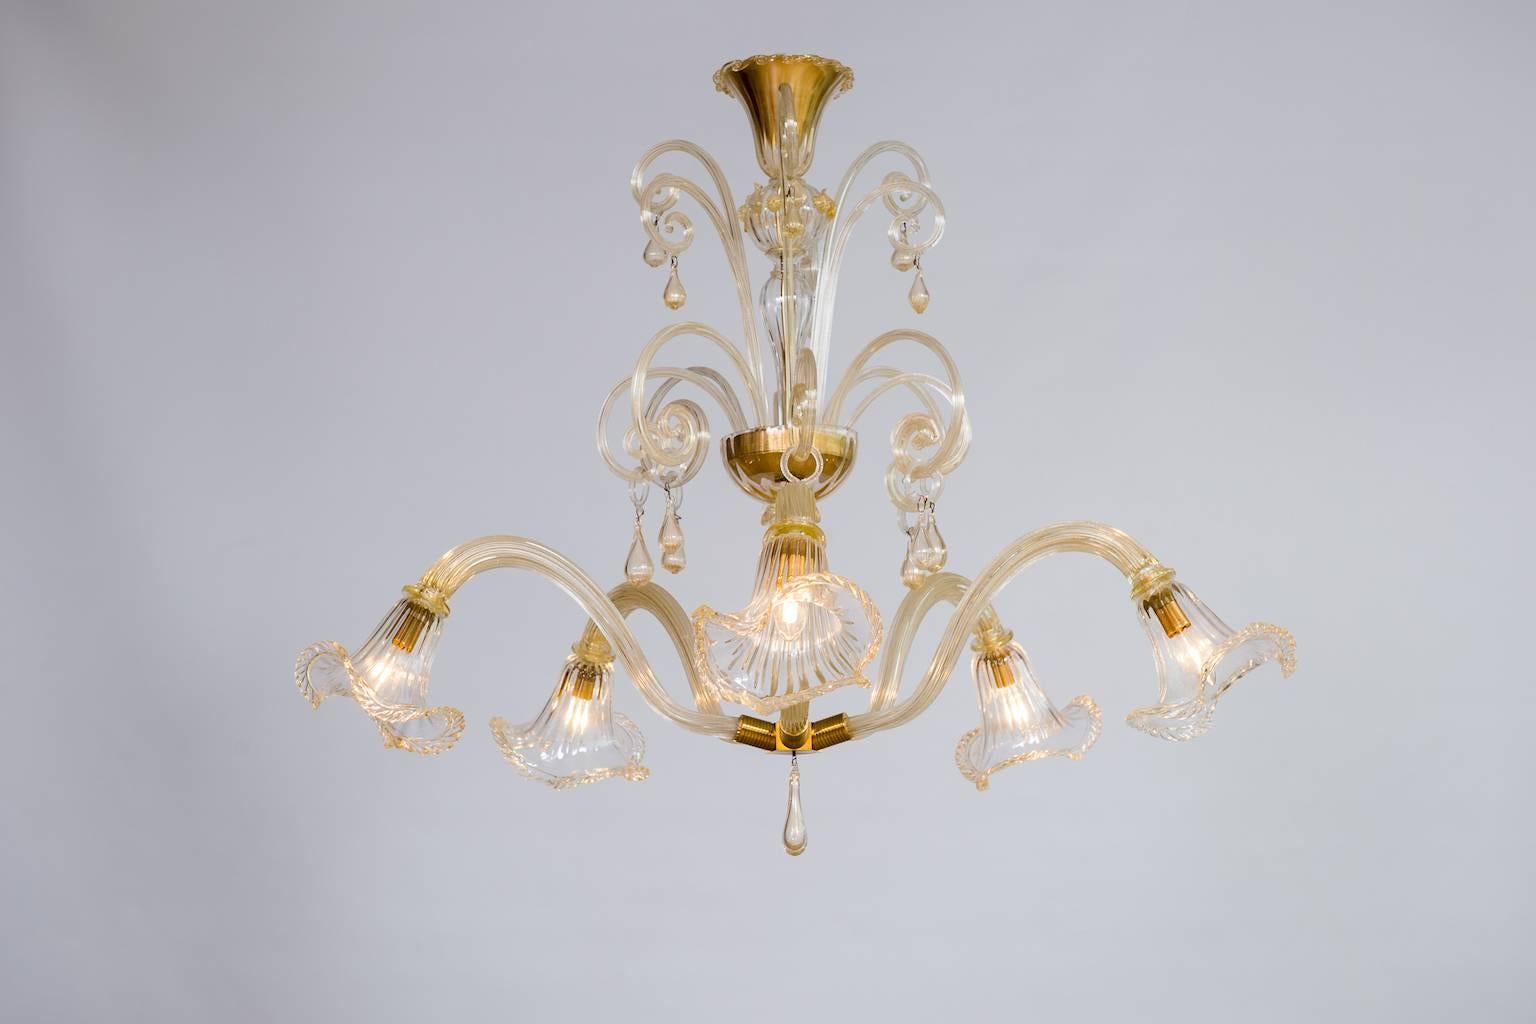 Italian Chandelier in Gold and Blown Murano Glass, Big Bells and Pendants 1970s For Sale 1